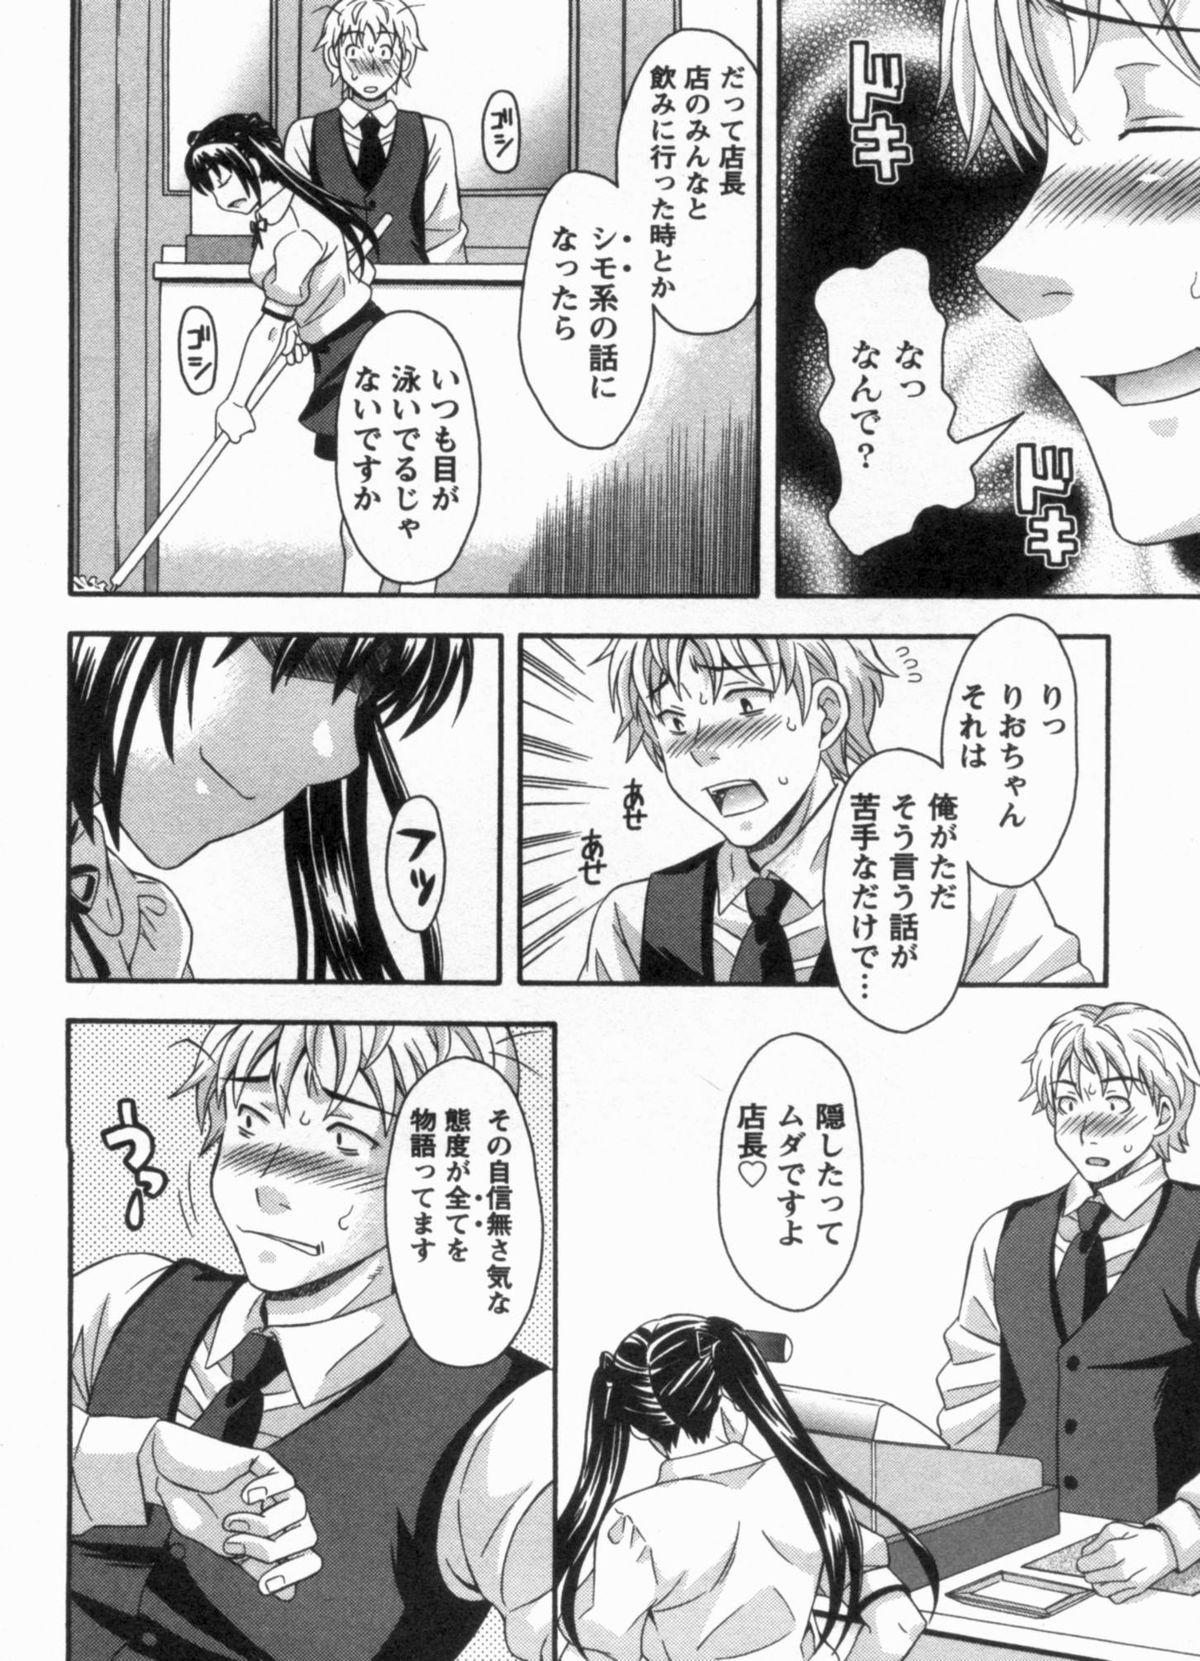 Asses Koi Cafe ni Youkoso!! 1 - Welcome to Love&cafe!! 1 Gaysex - Page 12